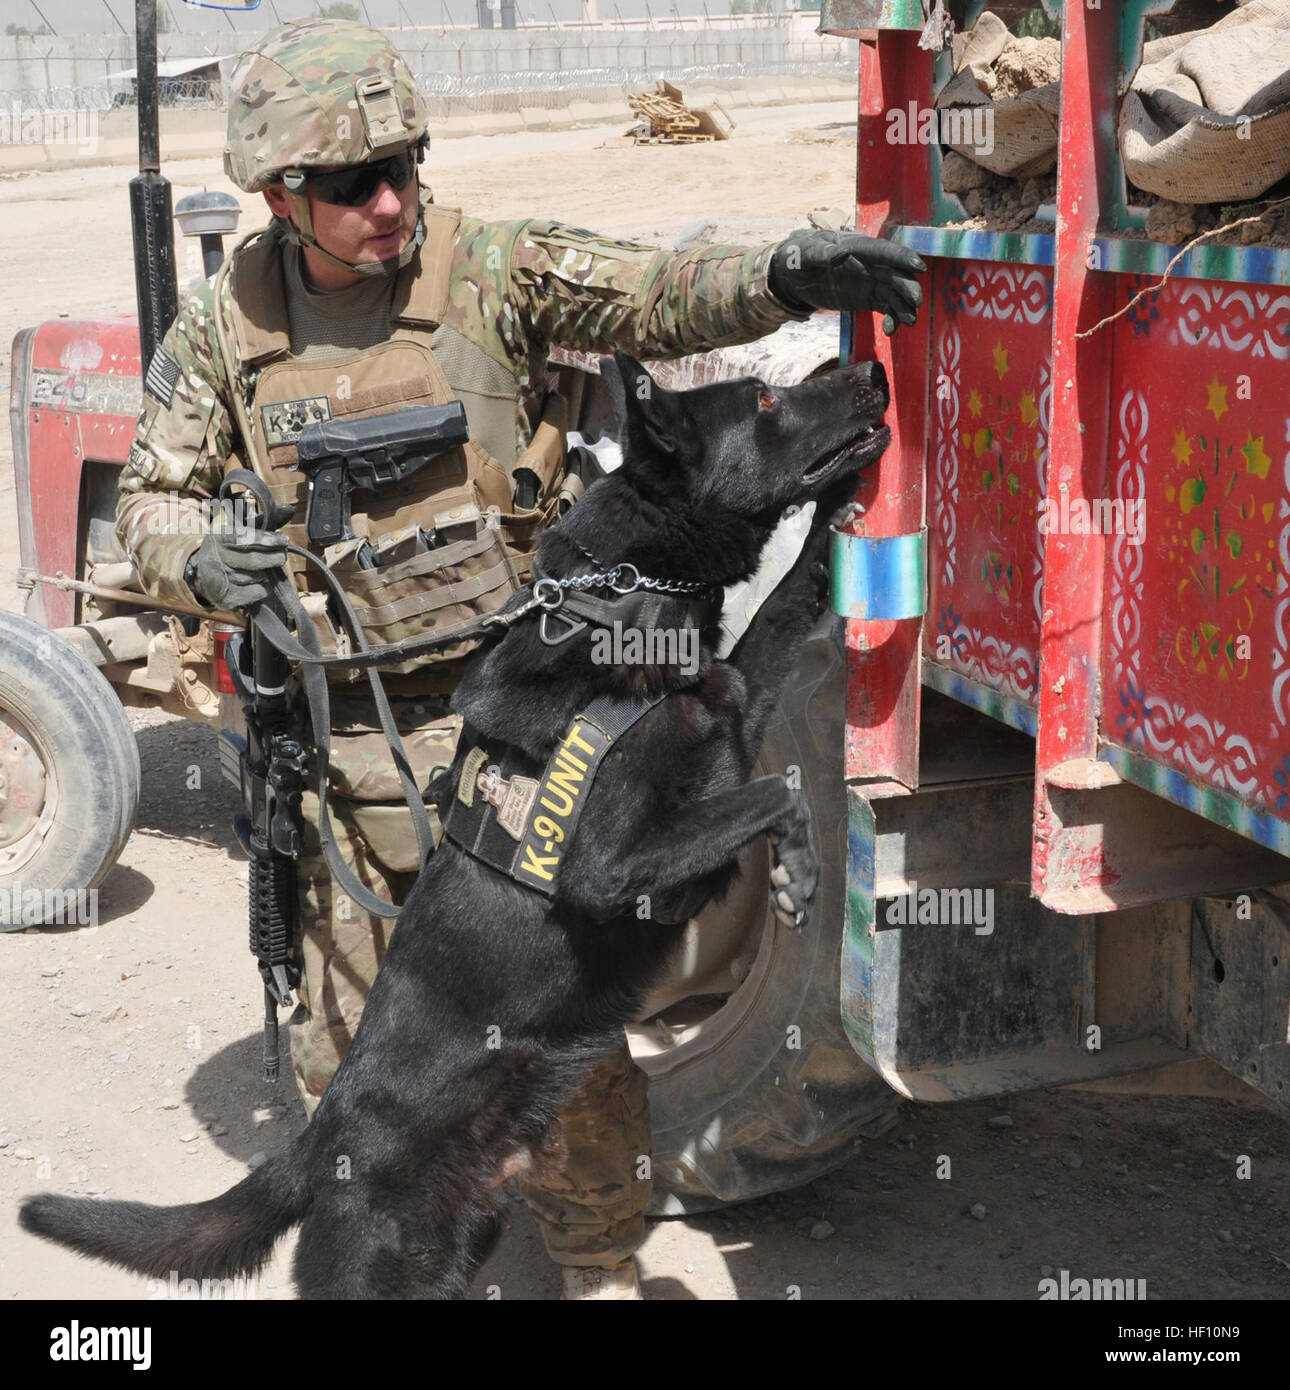 Sgt. Adam Serella, a narcotics patrol detector dog handler with the 3rd Infantry Division, guides his dog, Nero, while searching vehicles high and low during Operation Clean Sweep, conducted in districts throughout Kandahar City, Oct. 3. Nero's agility was exemplified as he maneuvered in and around the vehicles, not missing a single location Serella guided him to. 563rd MPs, AUP clearance operation discover two noses is better than one 121003-Z-NO327-165 Stock Photo